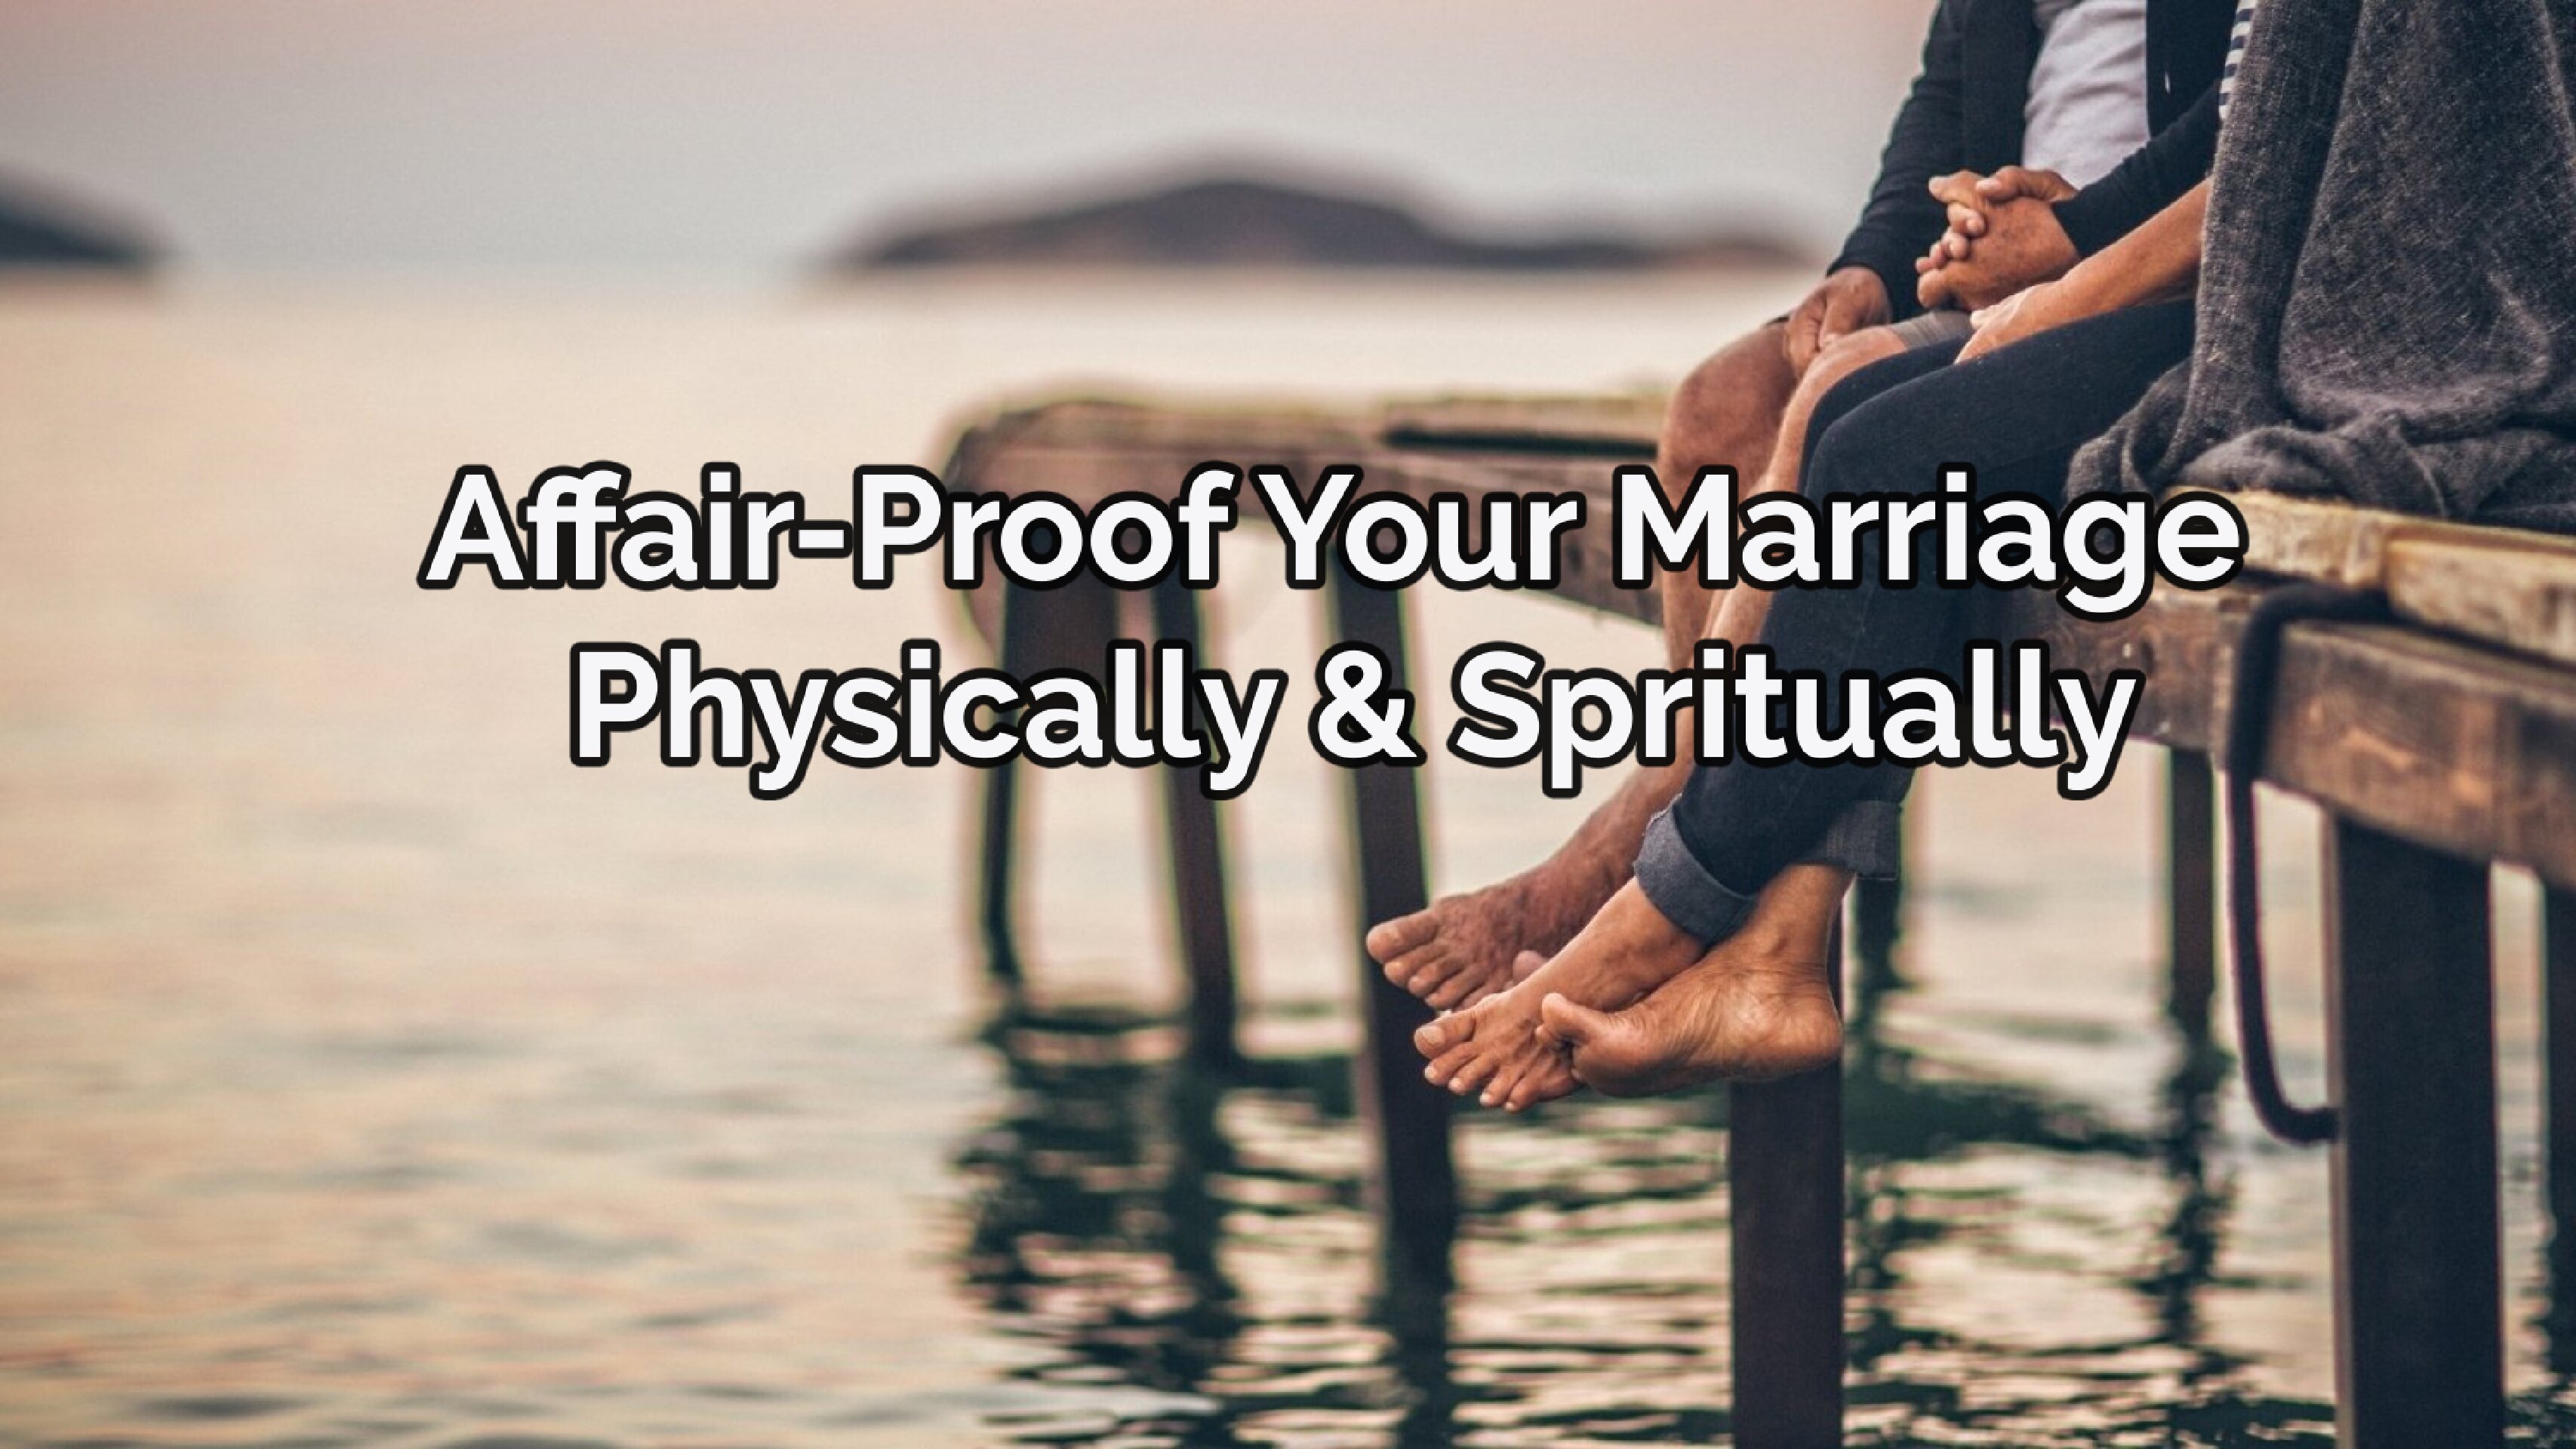 Affair-Proof Your Marriage Physically & Spiritually